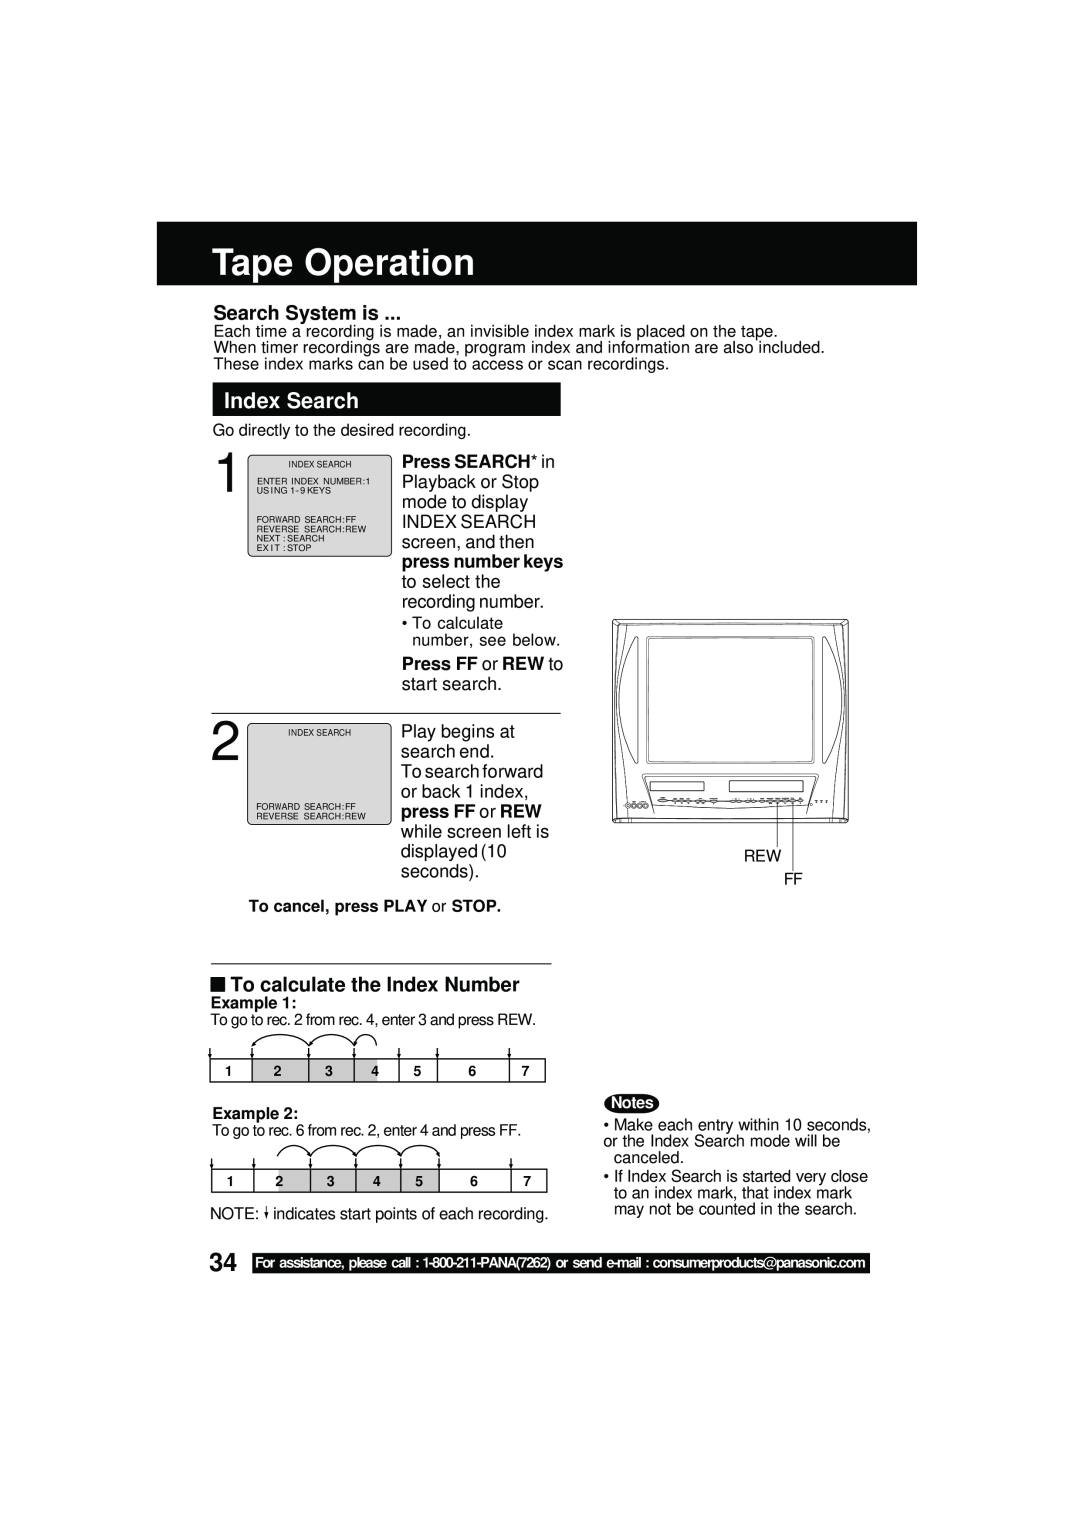 Panasonic PV DM2092 Tape Operation, Index Search, Search System is, To calculate the Index Number, Press FF or REW to 